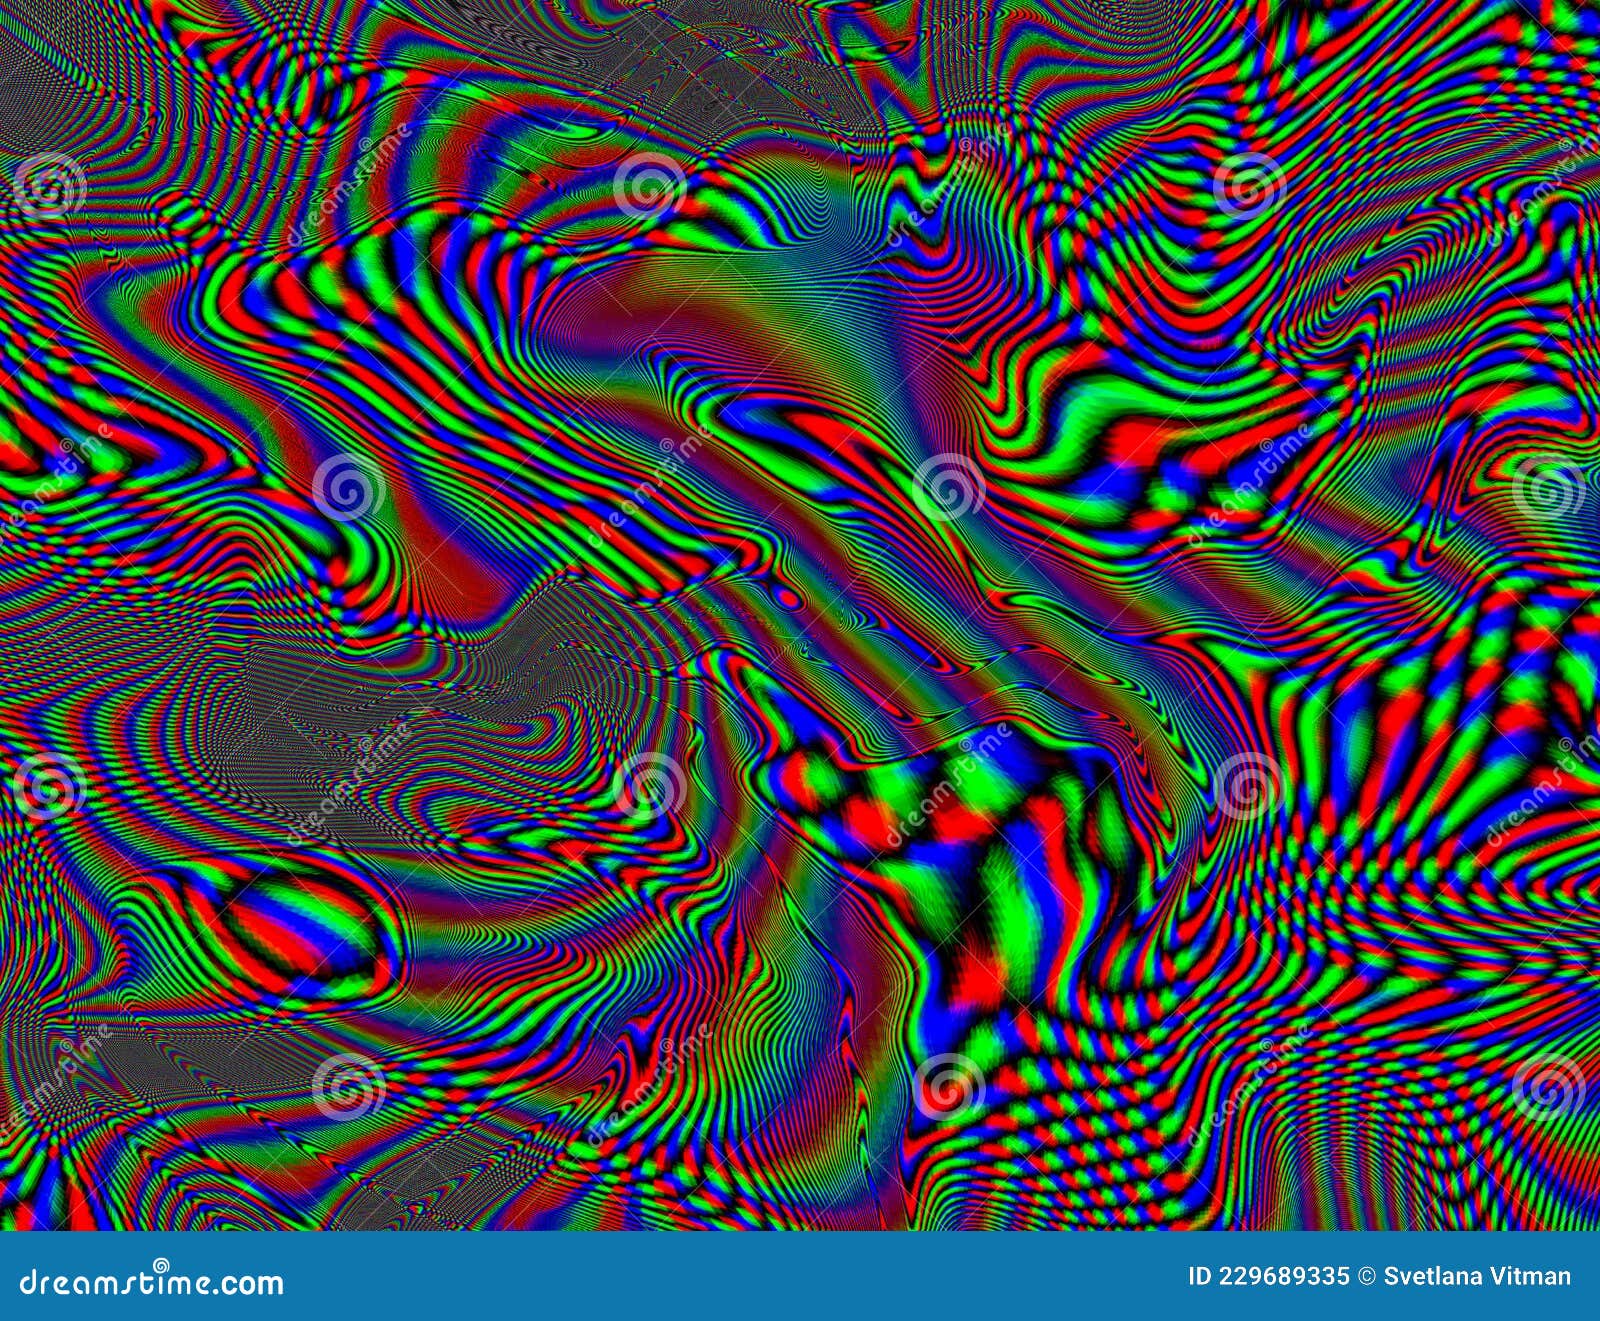 Trippy Psychedelic Rainbow Background Glitch LSD Colorful Wallpaper. 60s  Abstract Hypnotic Illusion Stock Image - Image of hippy, texture: 229689335